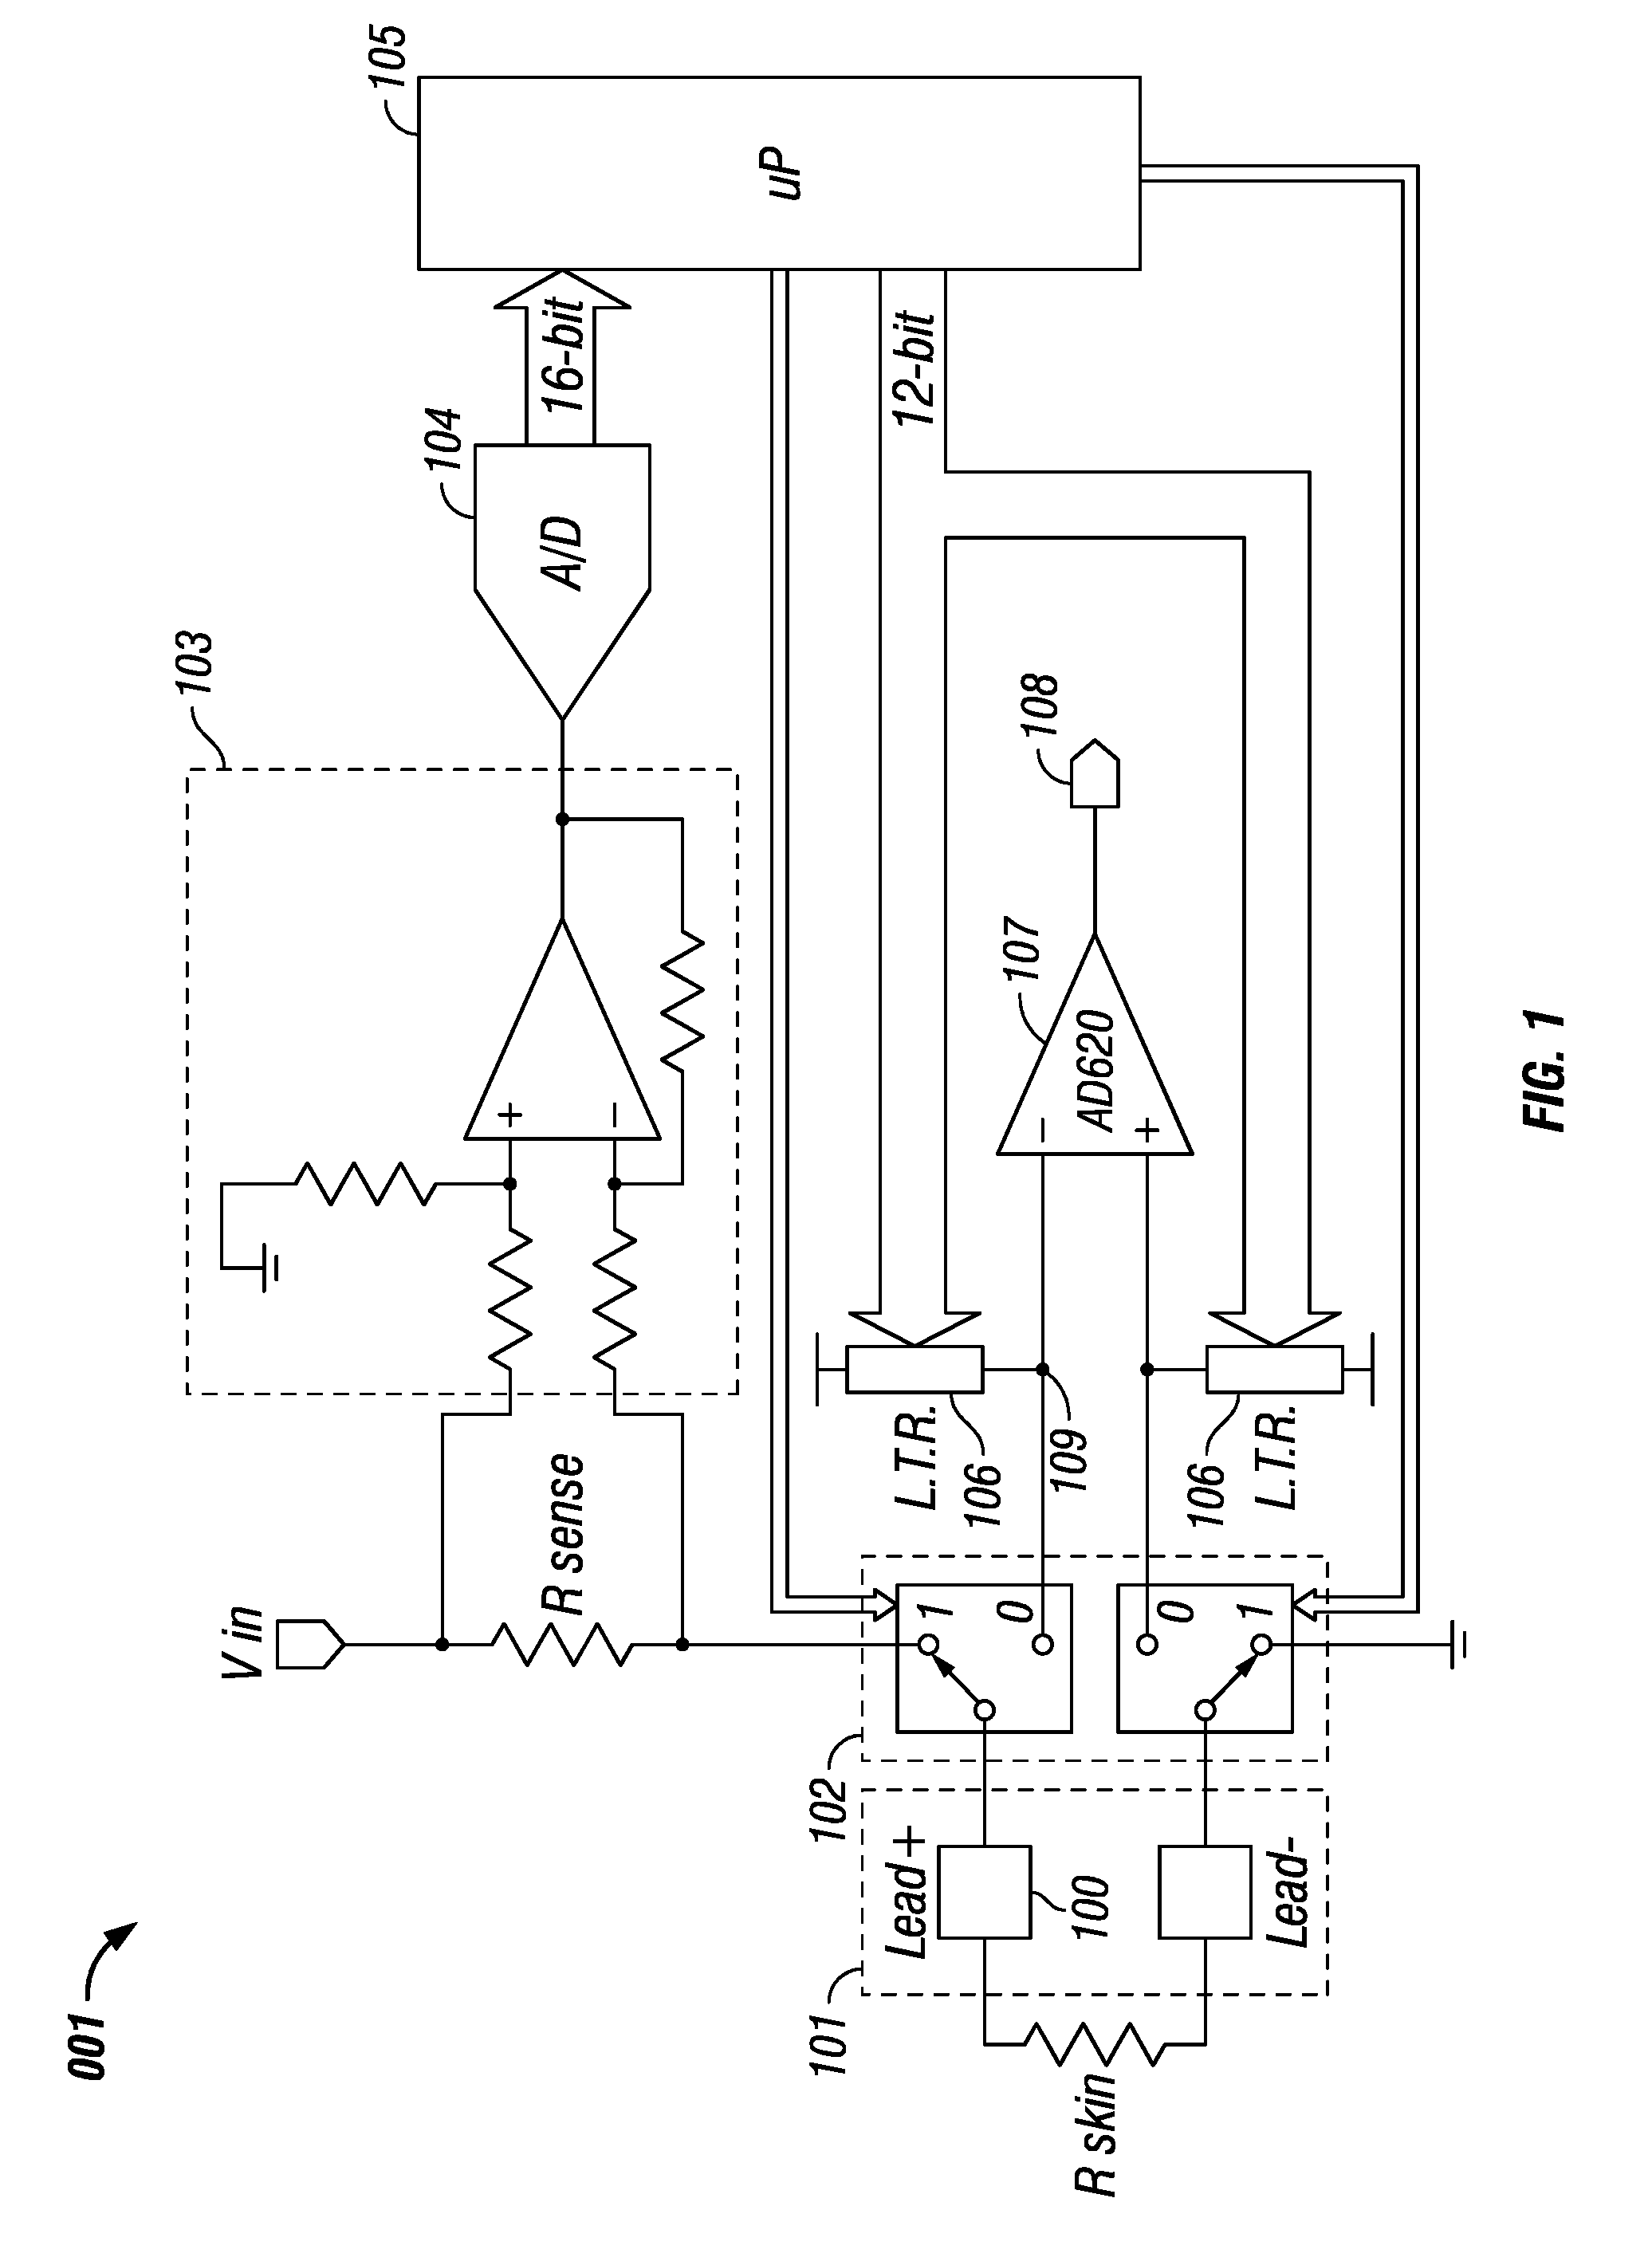 Skin impedance matching system and method for skin/electrode interface